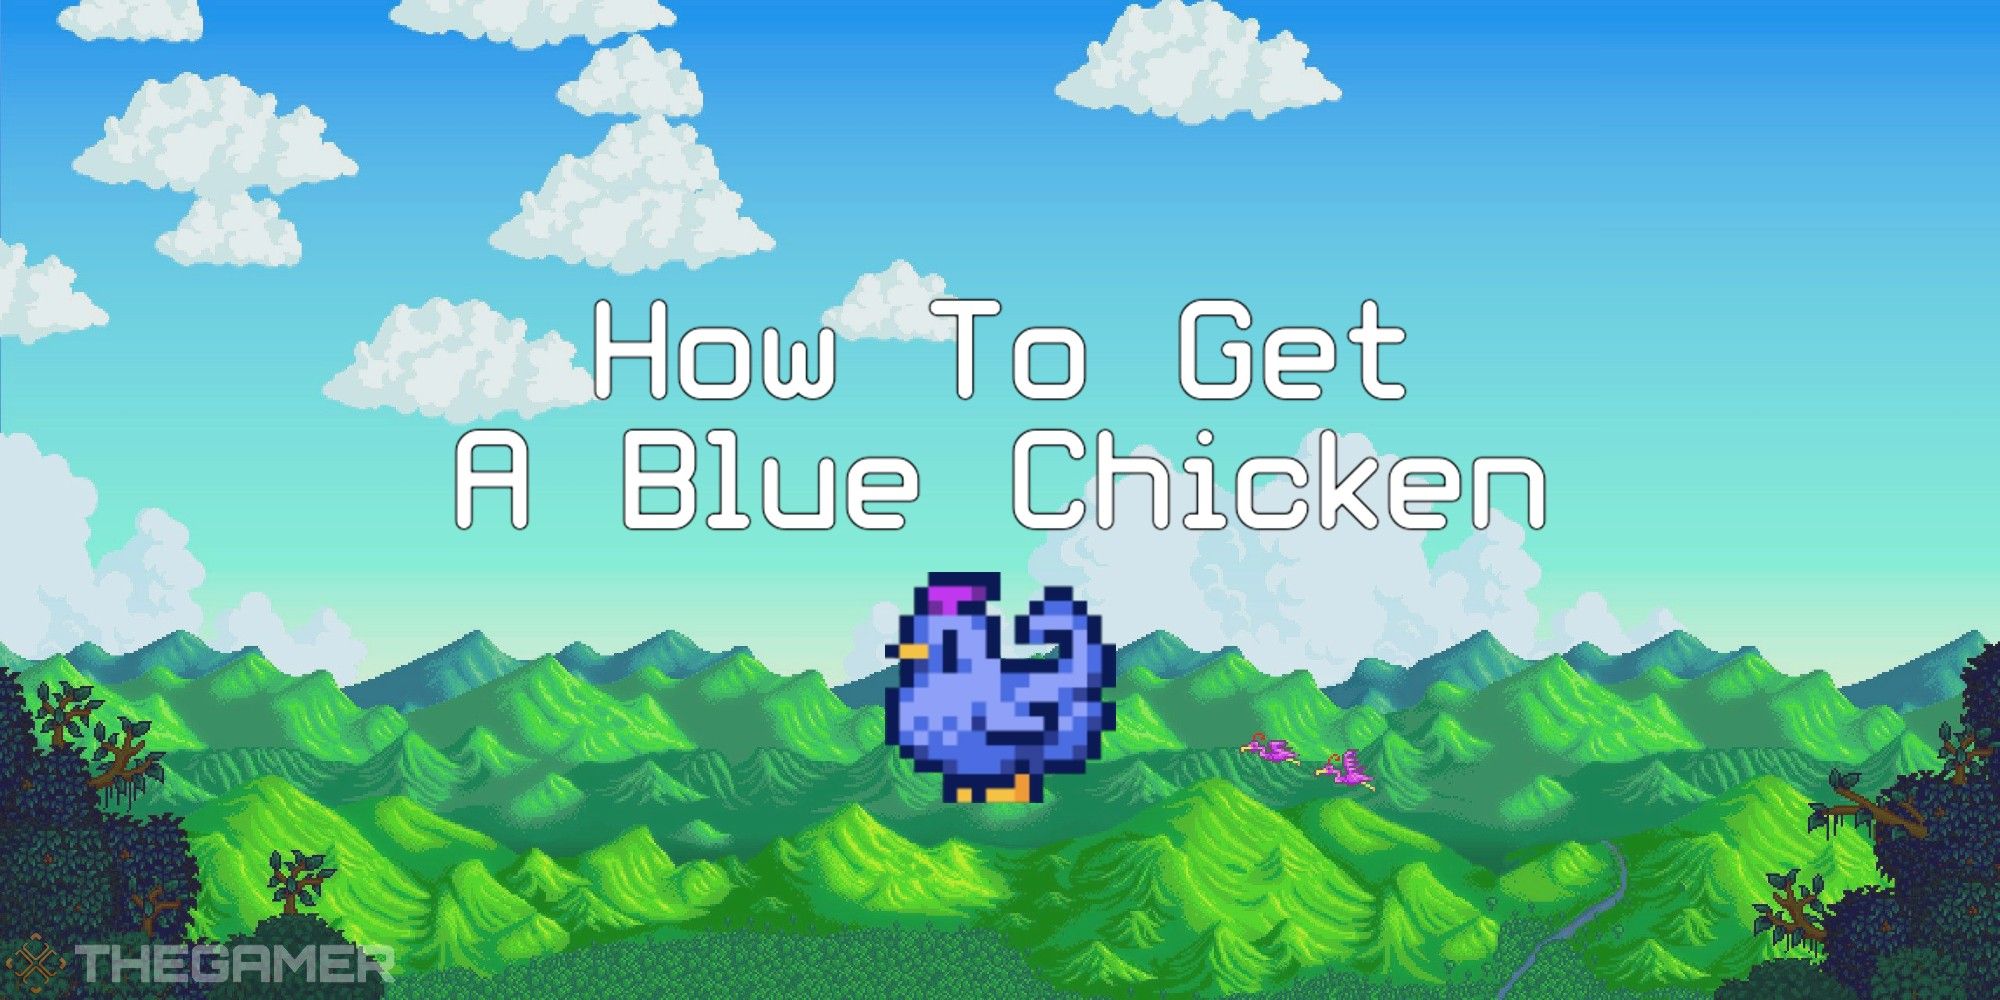 stardew valley how to get a blue chicken with chicken and landscape